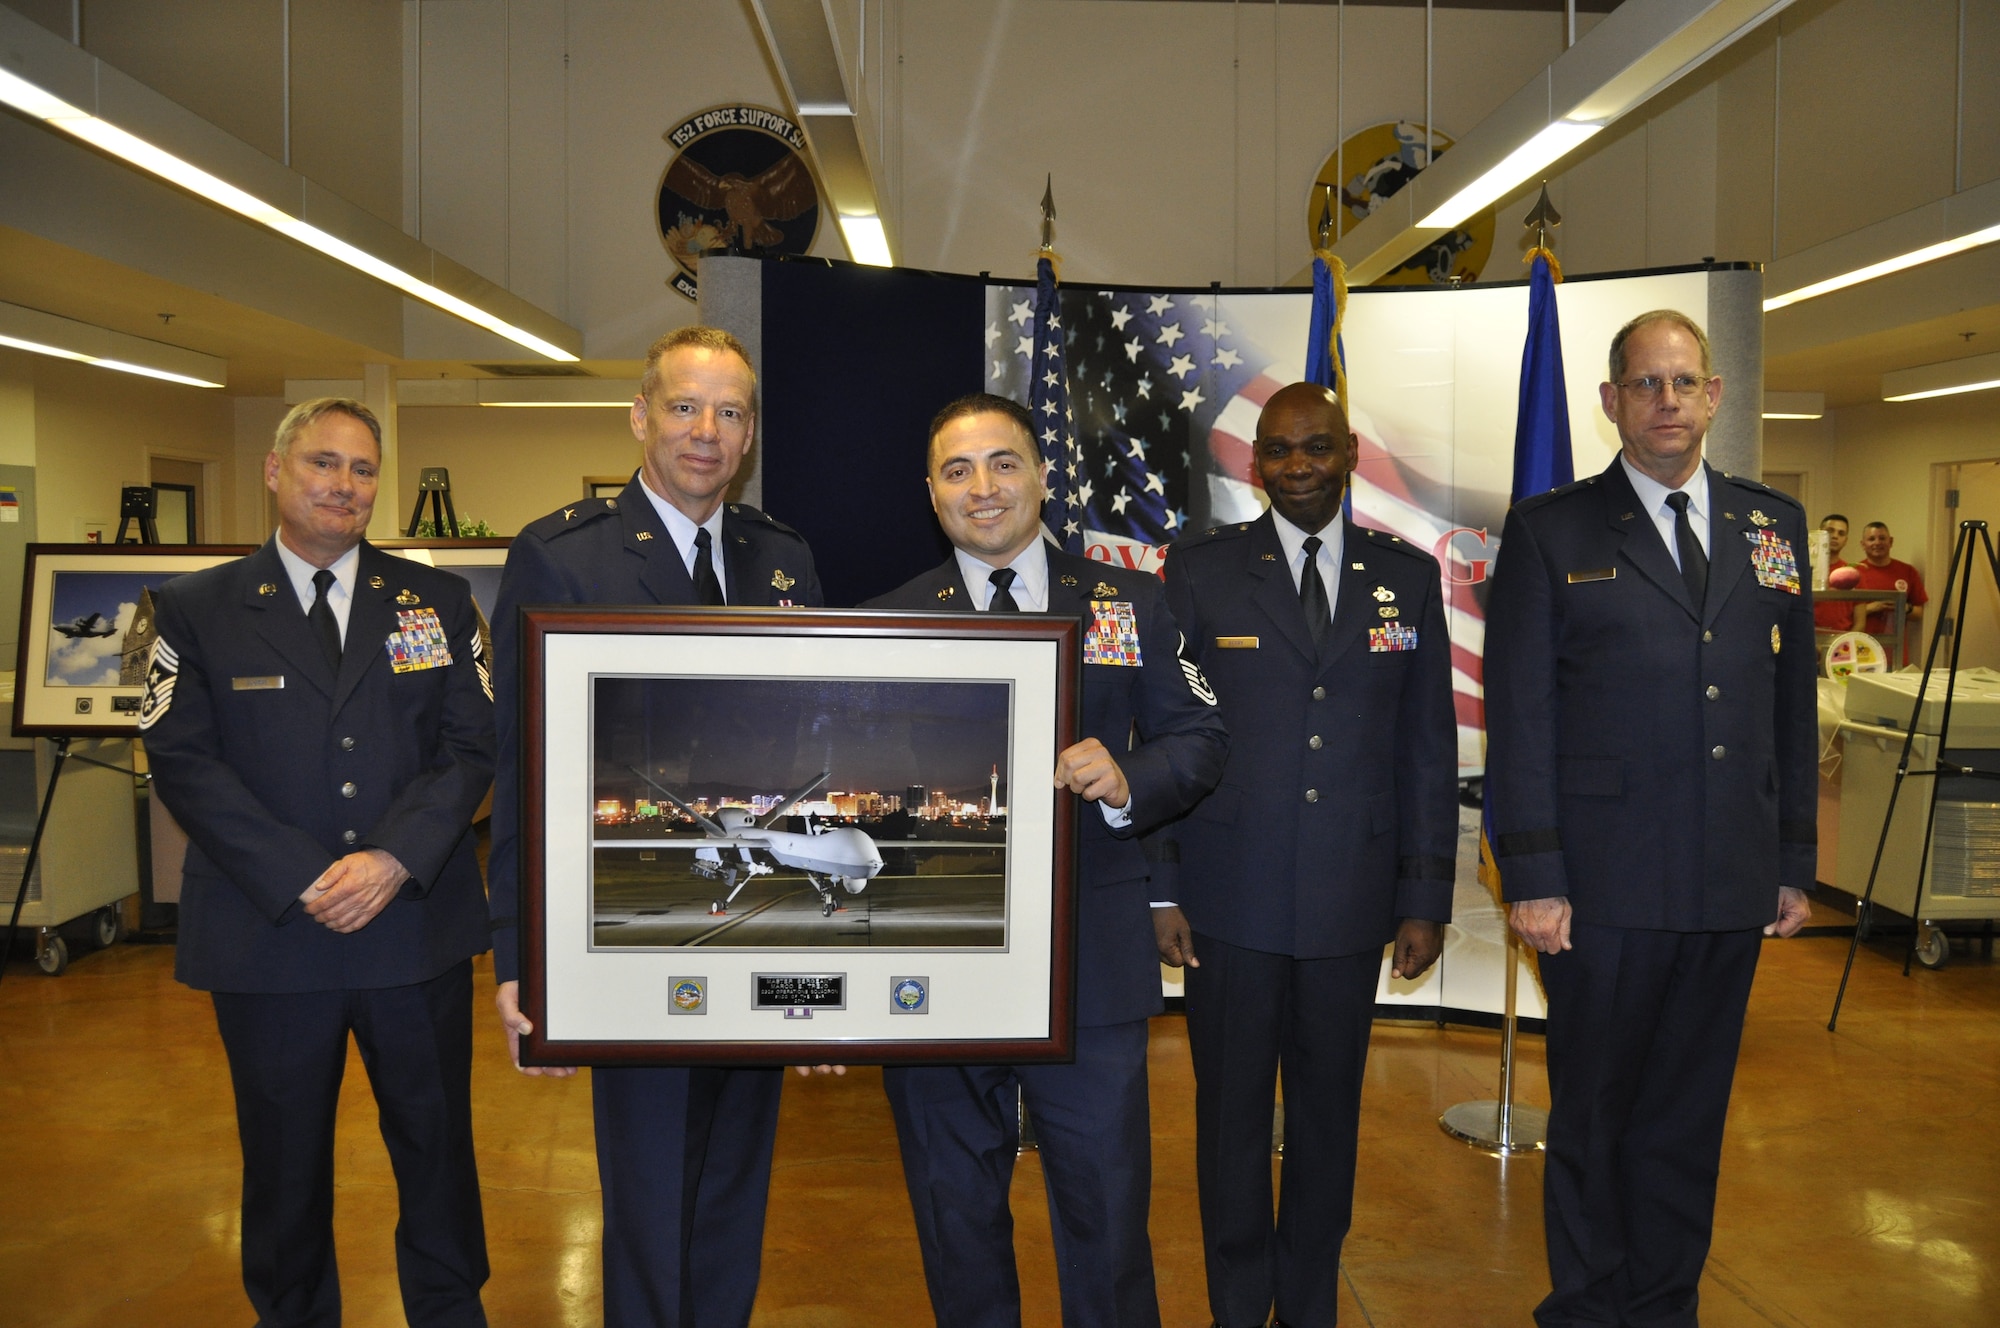 Master Sgt. Marco Trejo accepts his award for being named the Senior Non-Commissioned Officer of the Year from Chief of Staff, Nevada Air National Guard, Brig. Gen. David Snyder at the 2014 Outstanding Airmen of the Year Awards Banquet on Saturday. Left to right, Senior Enlisted Leader, Chief Master Sgt. Rick Scurry; Snyder; Trejo; Assistant Adjutant General, Brig. Gen. Ondra Berry; and the Adjutant General, Brig. Gen. William Burks.